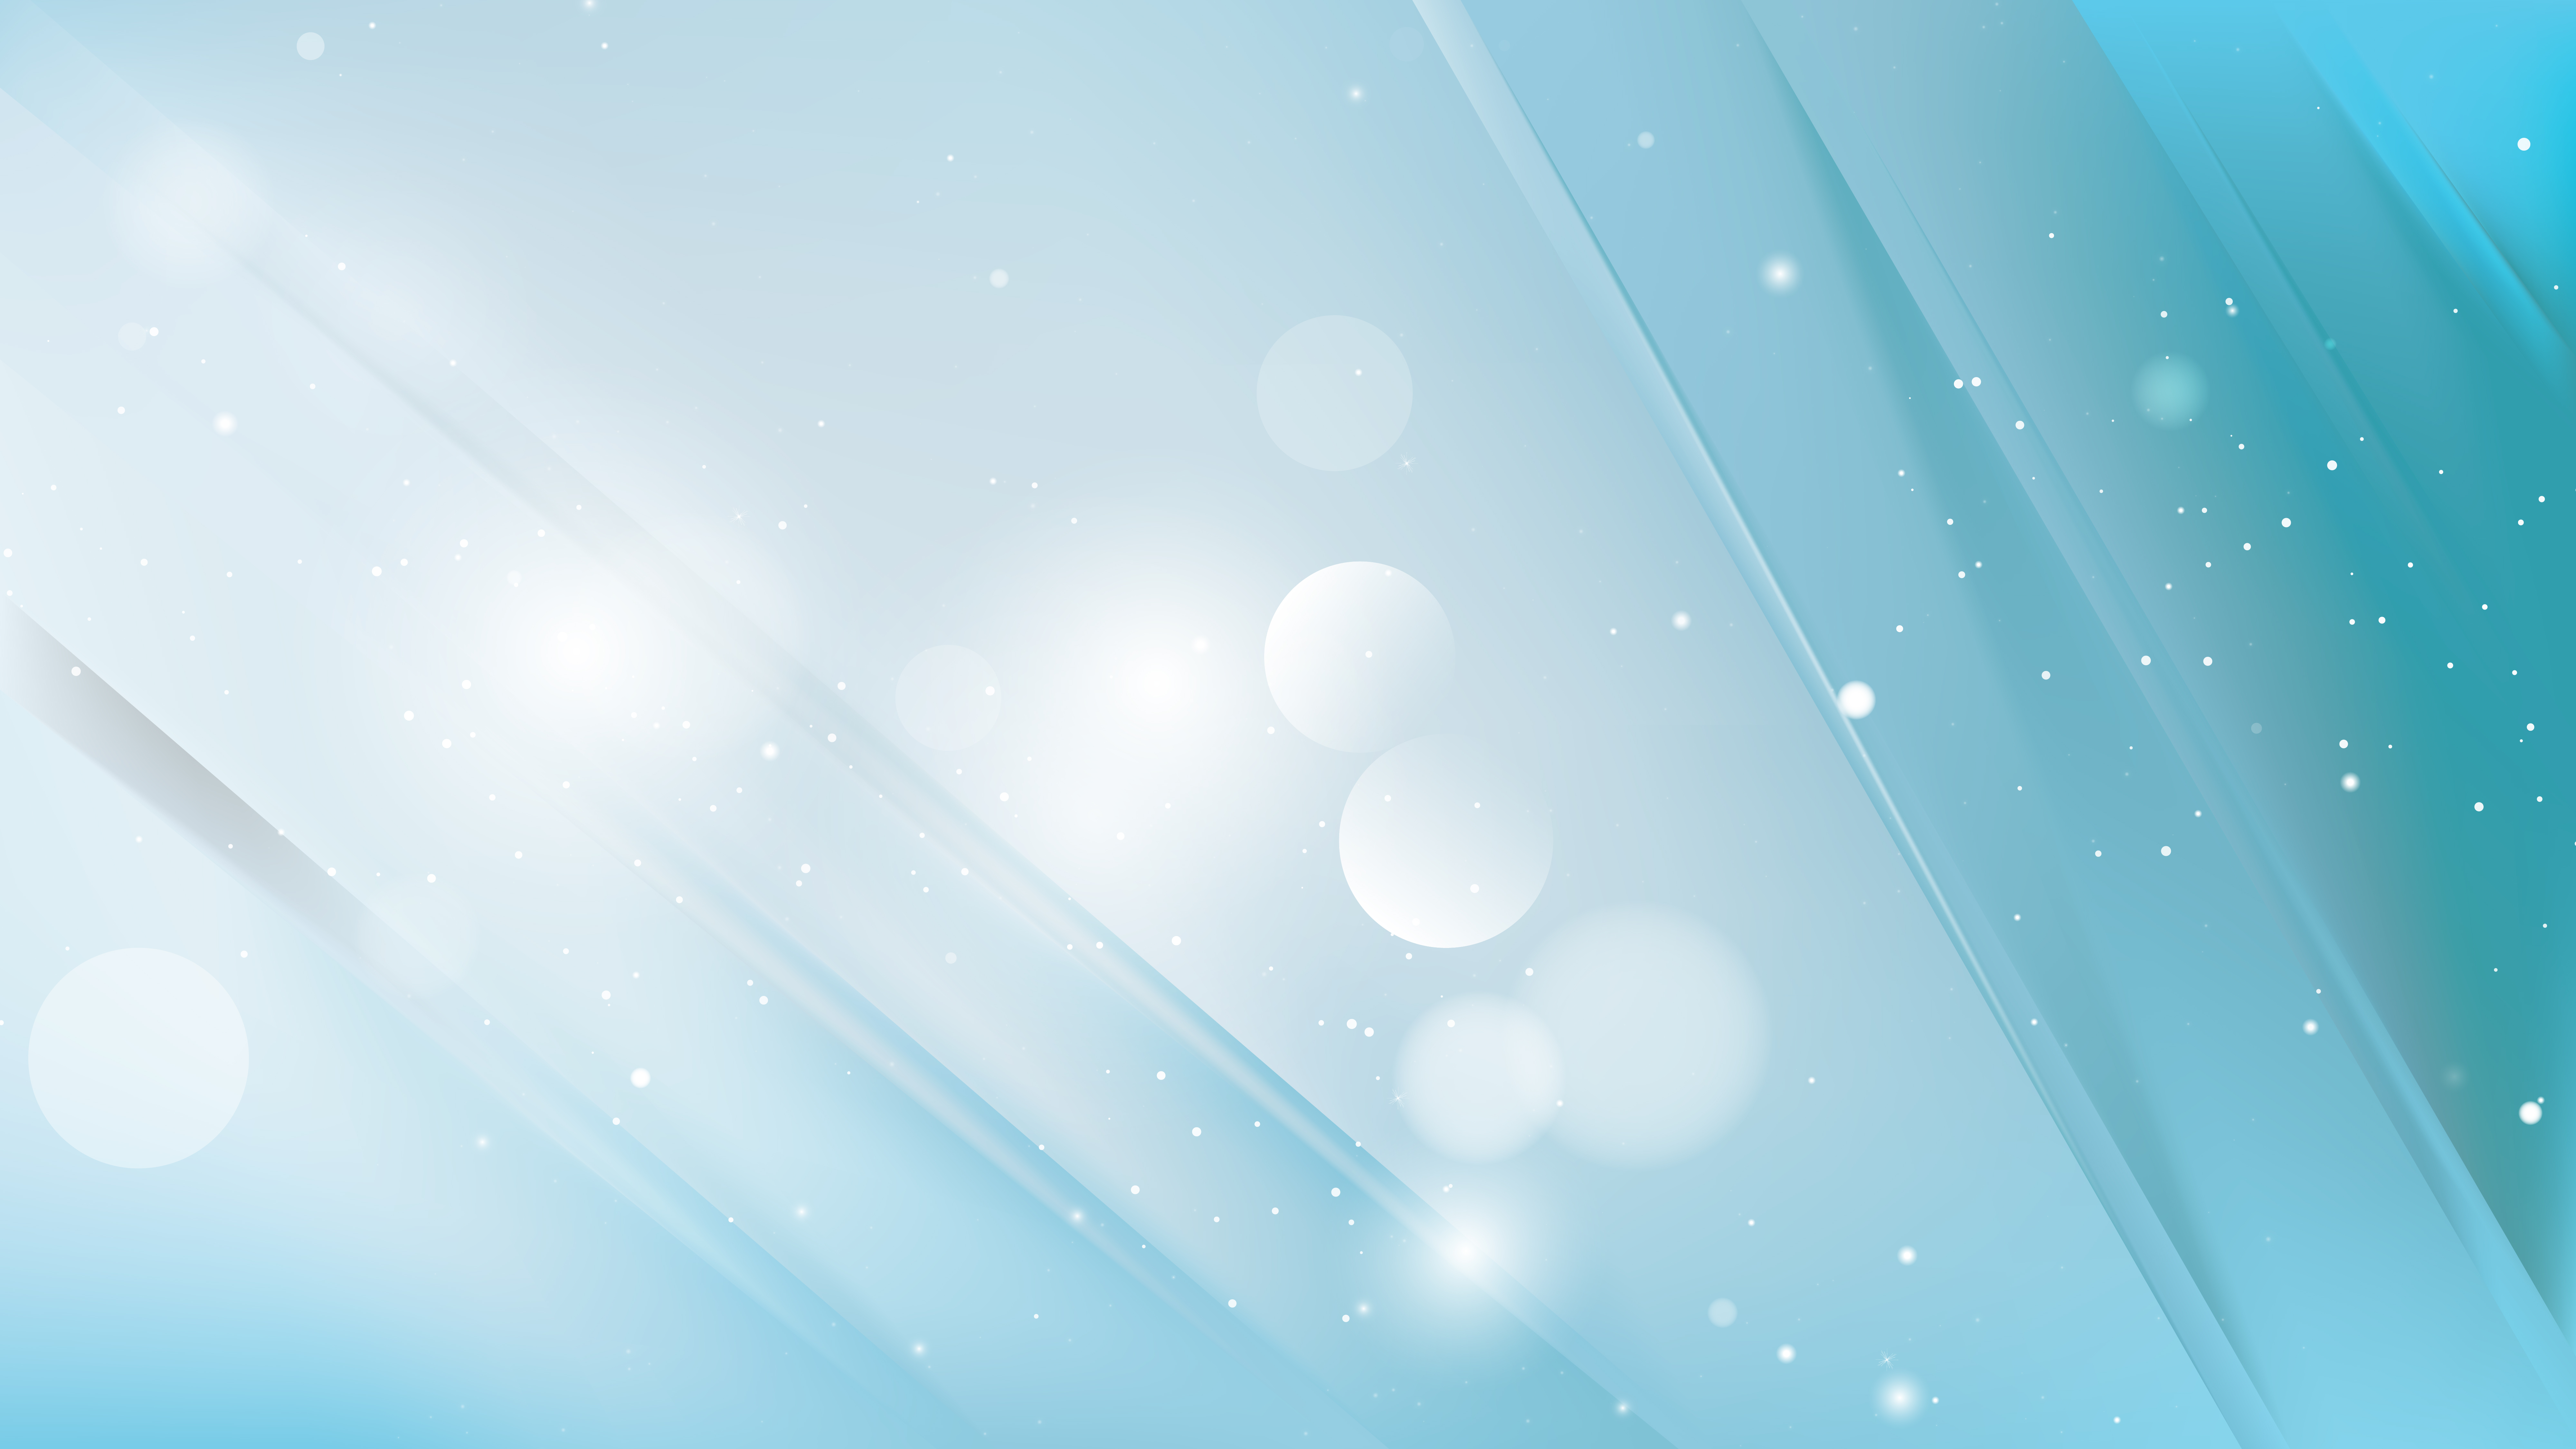 Free Abstract Light Blue Background Graphic Design